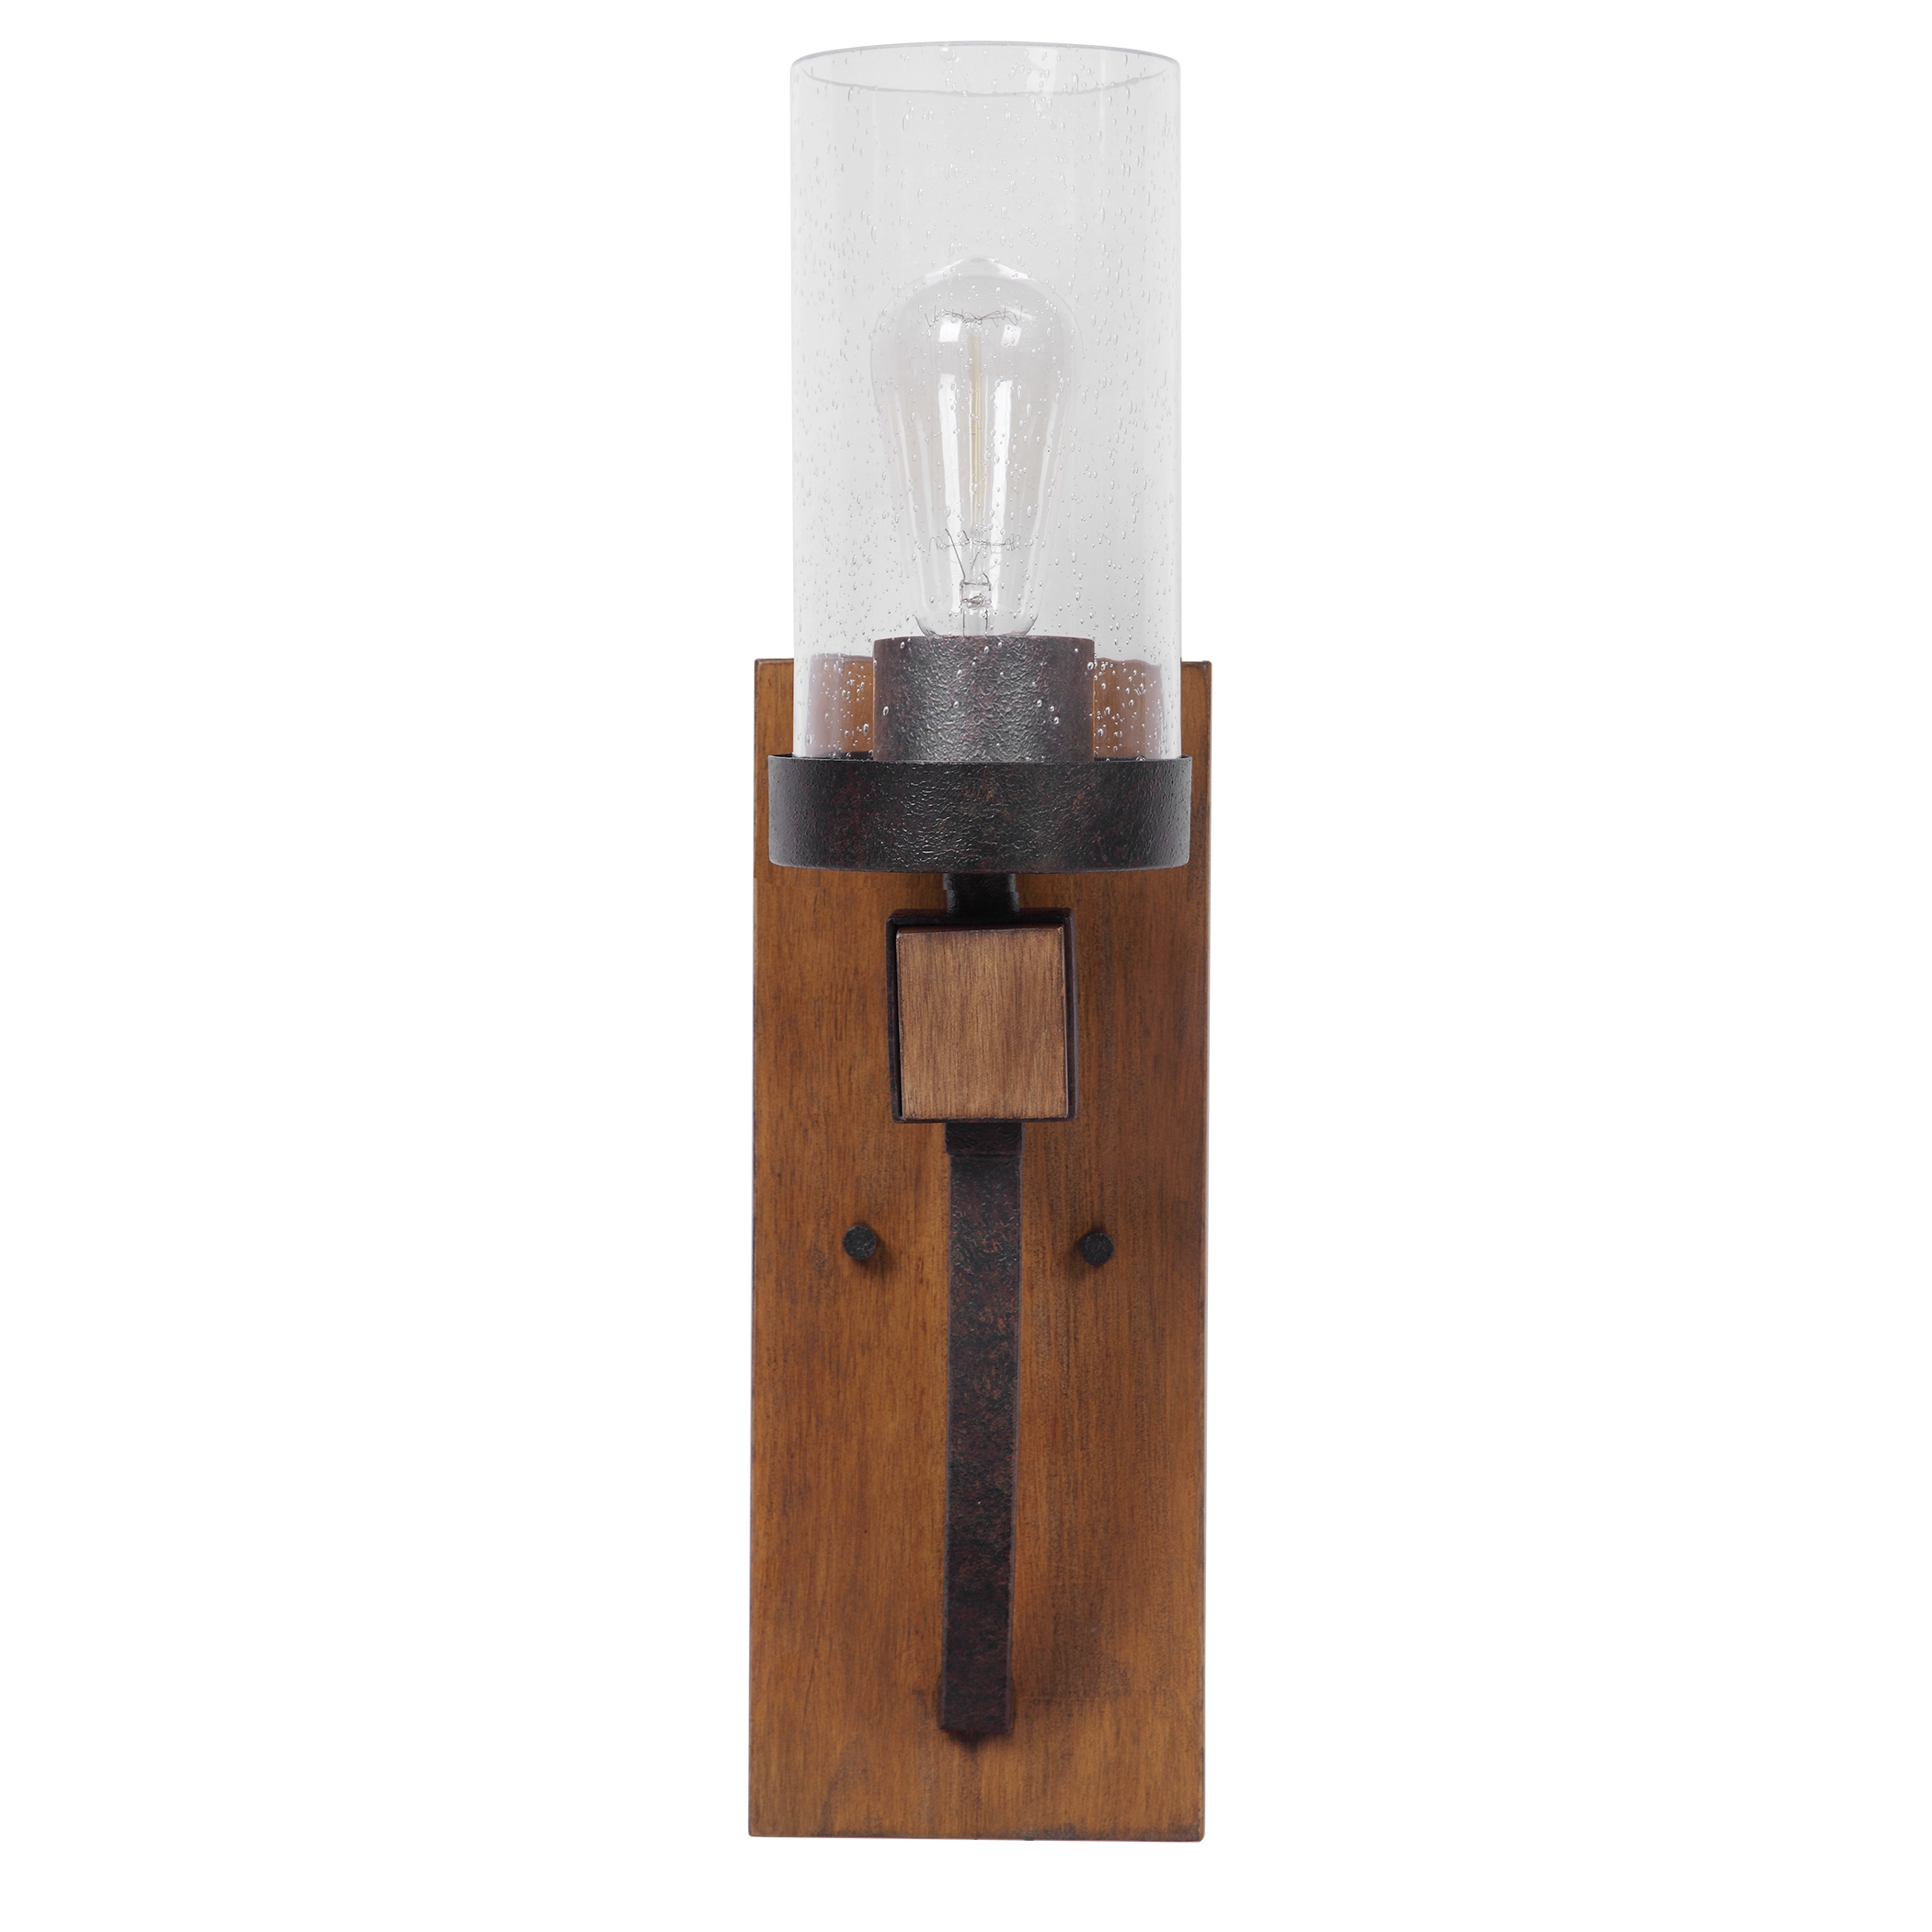 Atwood 1 Light Sconce - Image 1